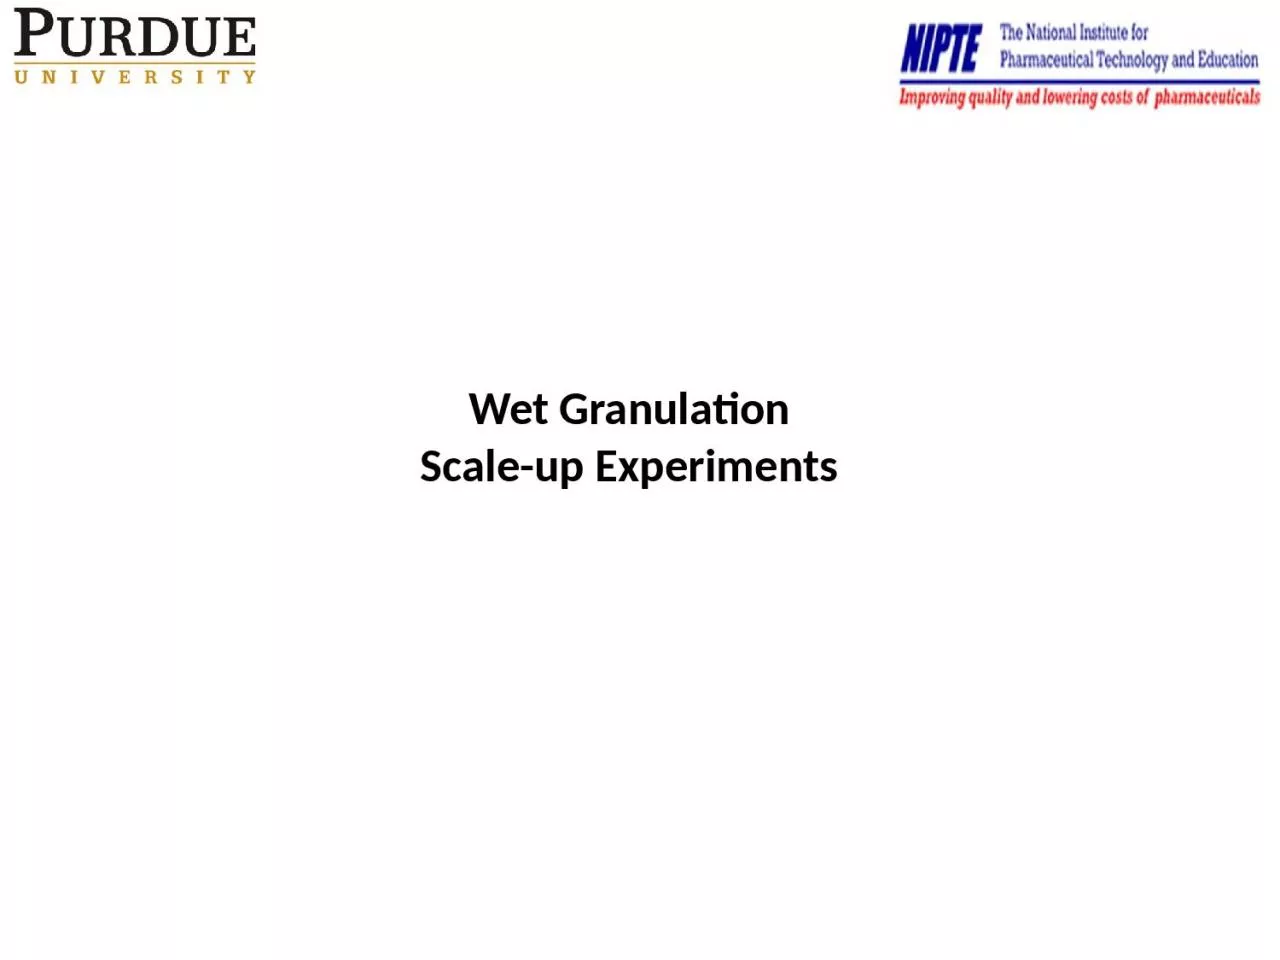 Wet Granulation Scale-up Experiments